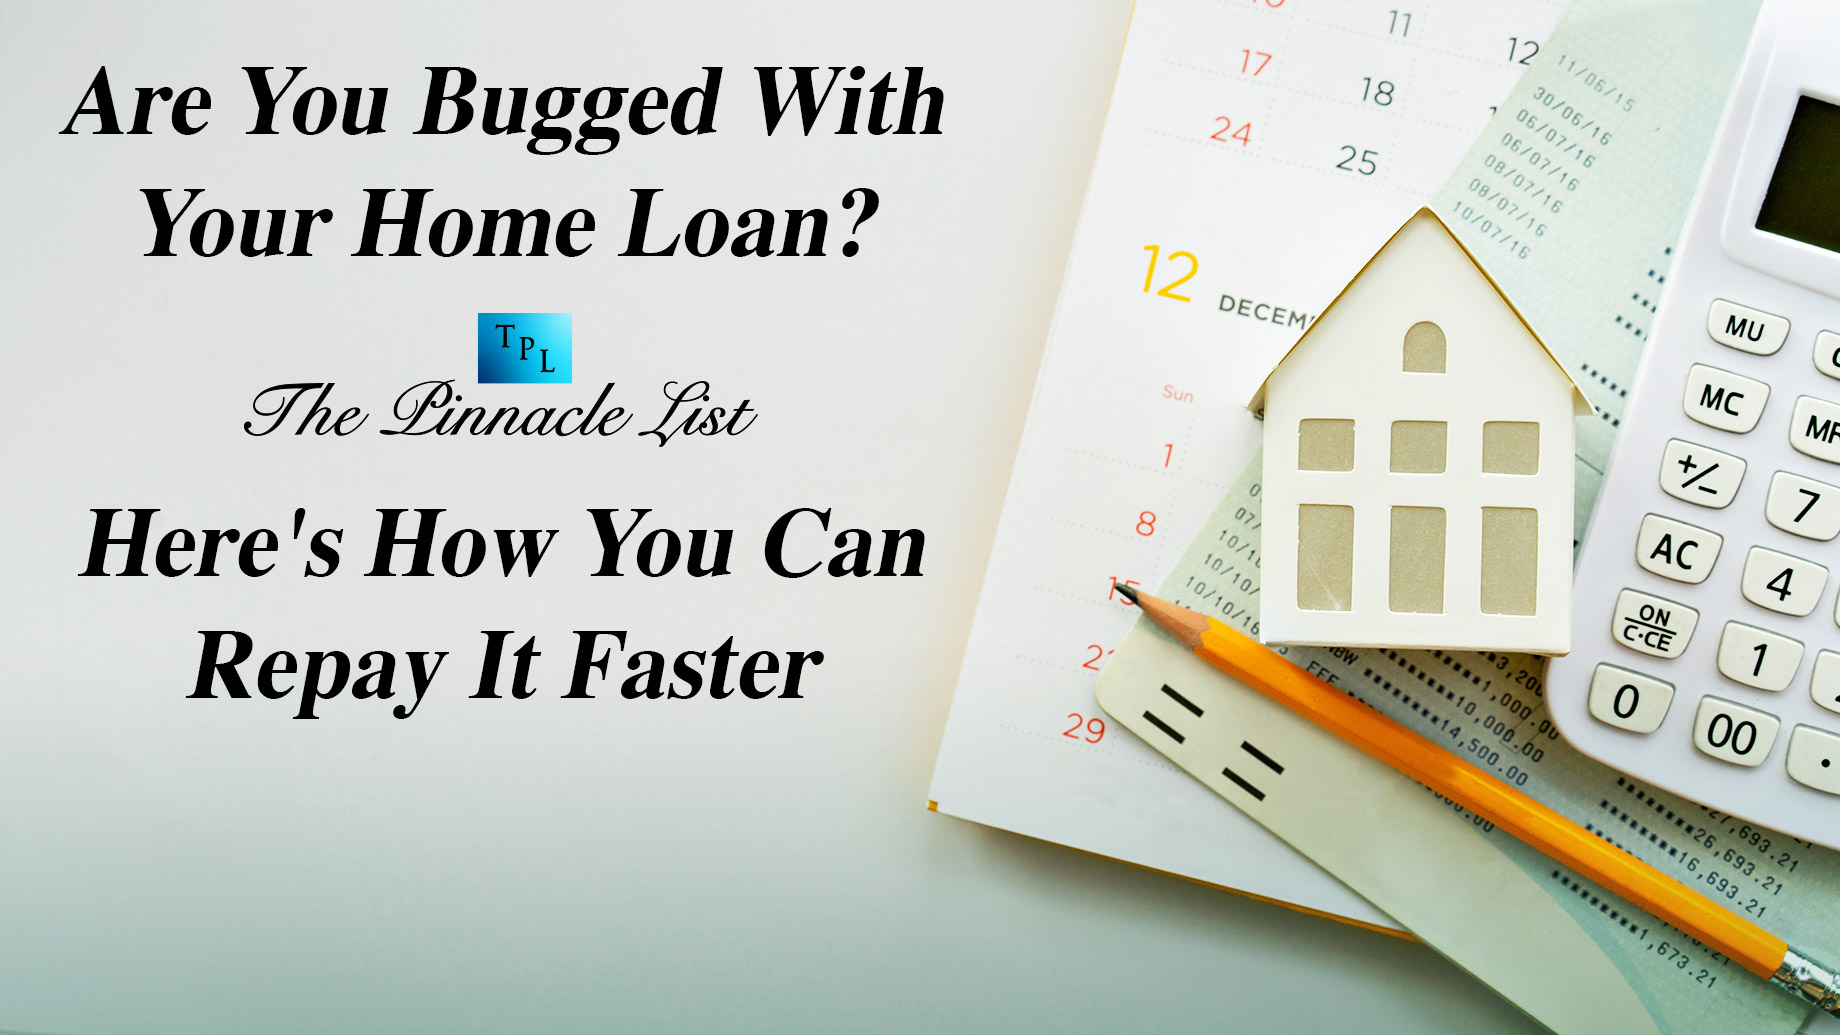 Are You Bugged With Your Home Loan? Here's How You Can Repay It Faster